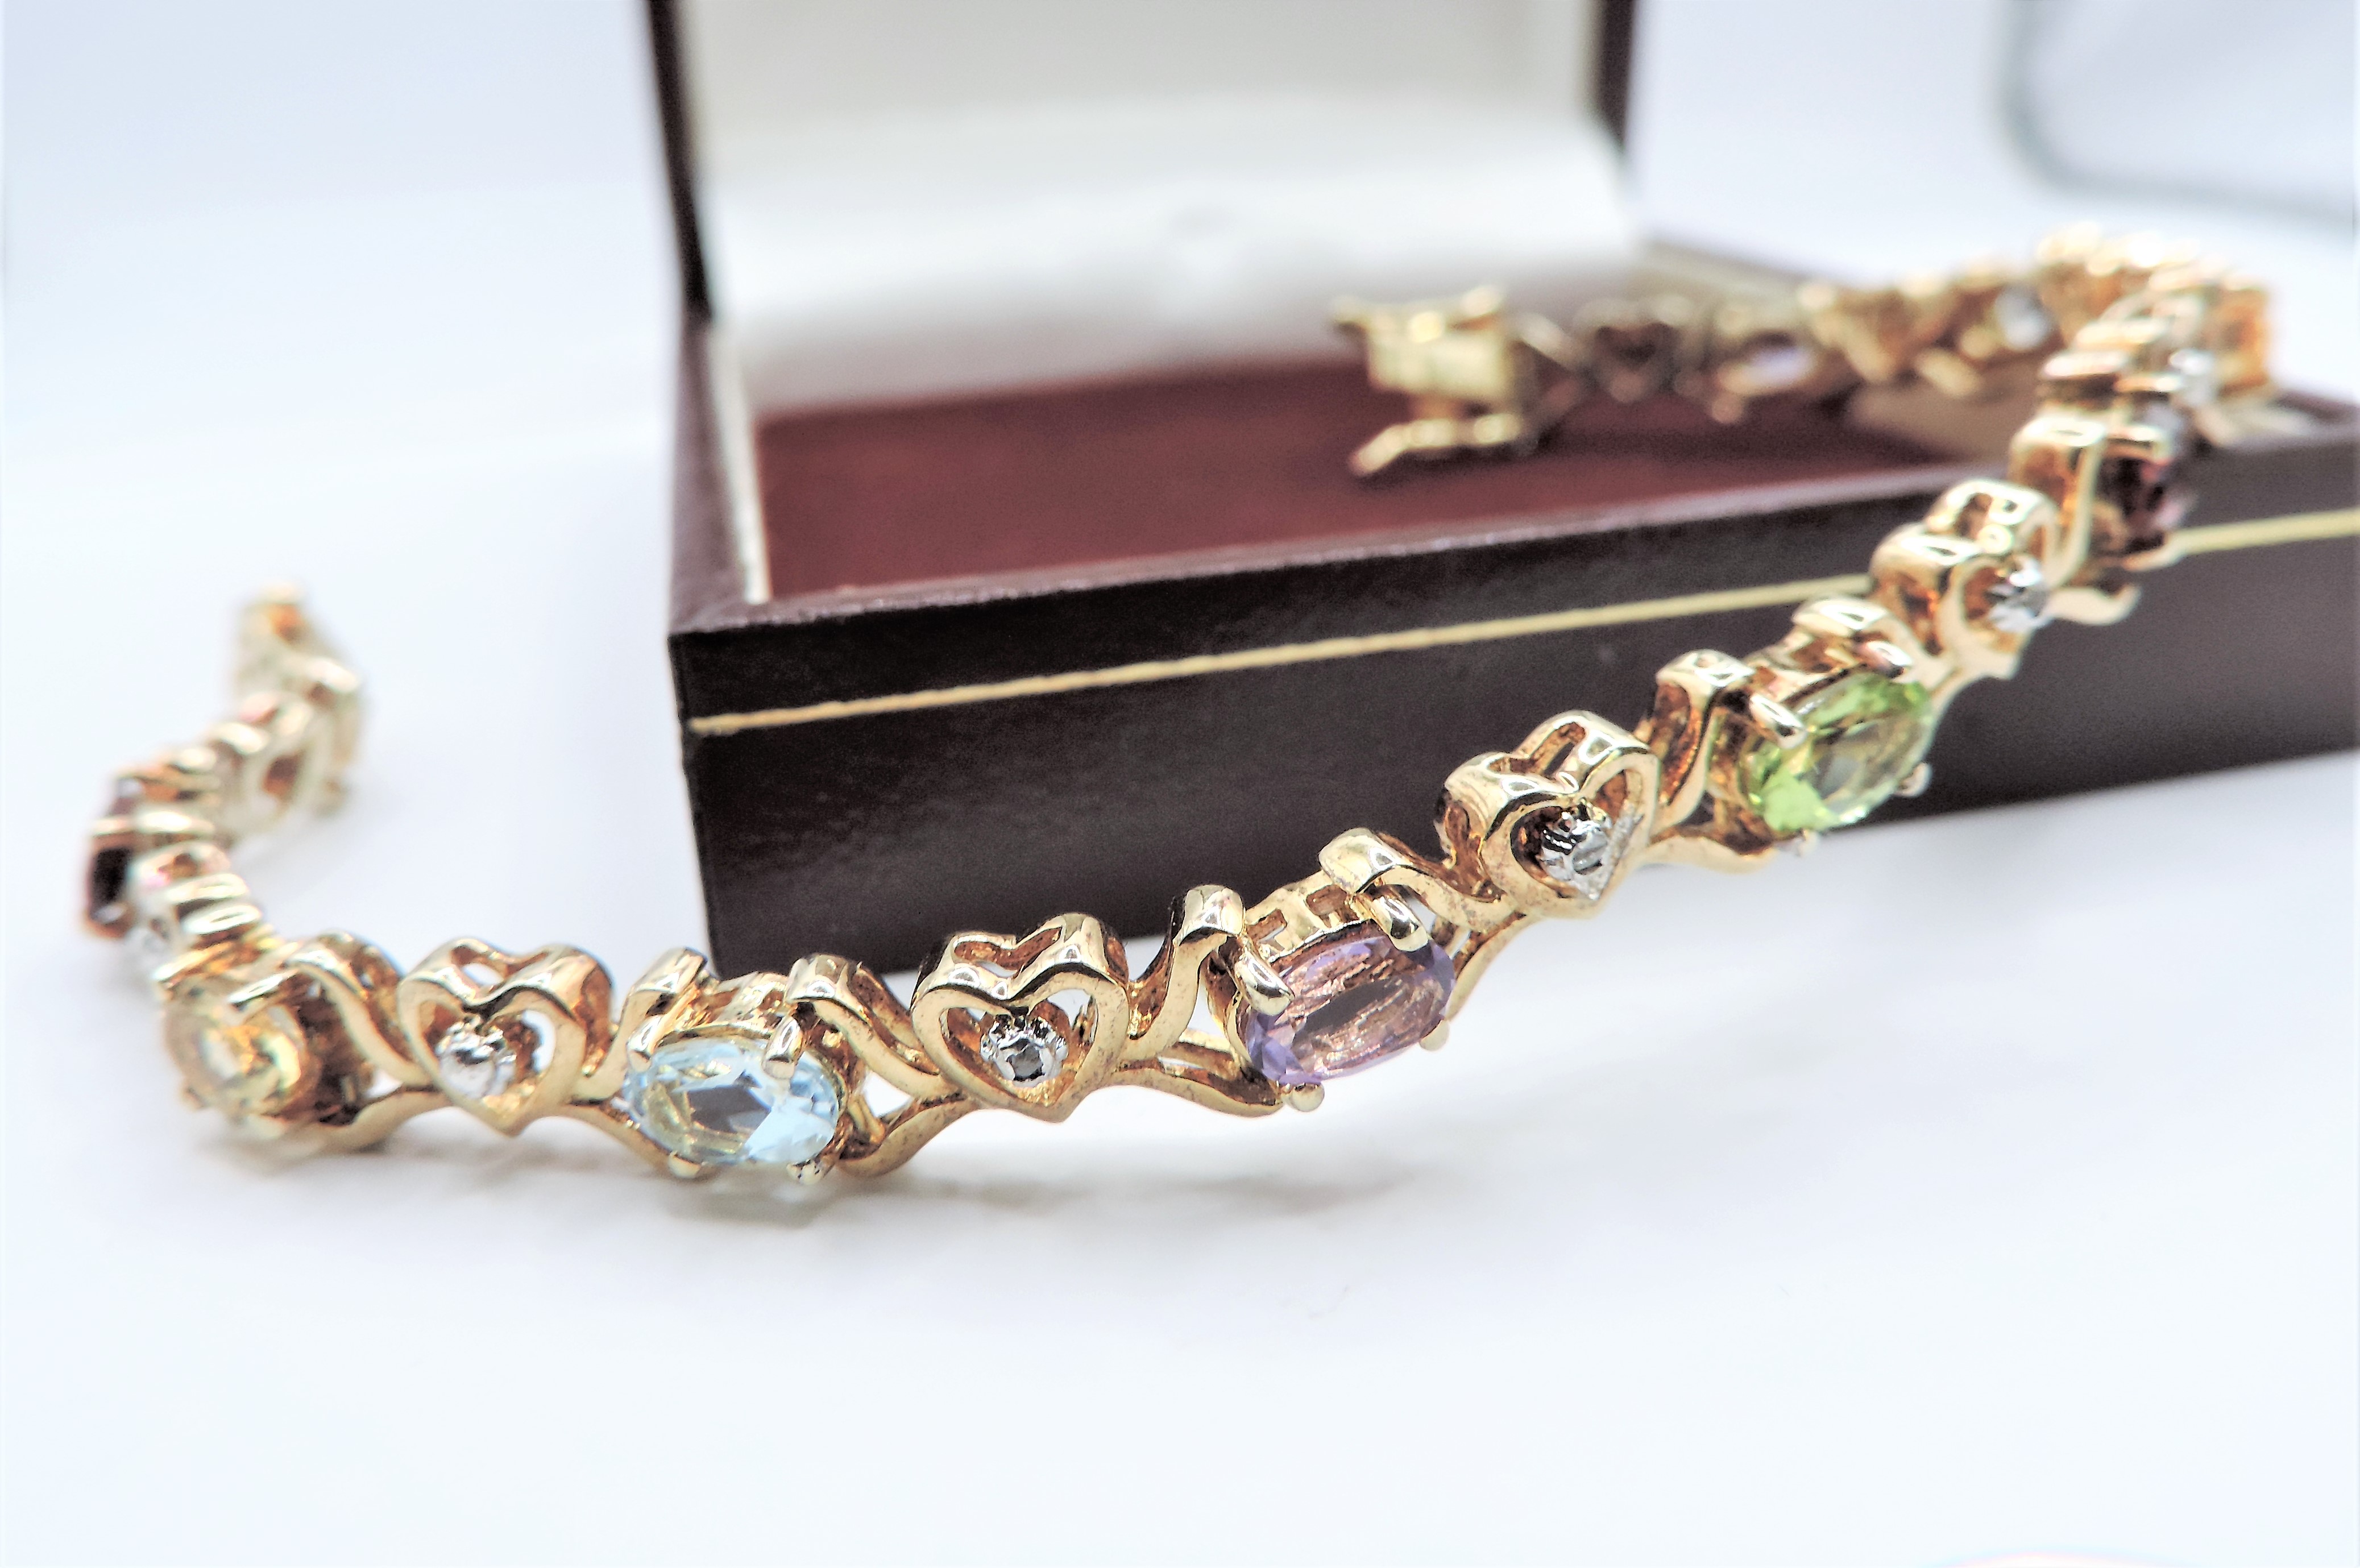 Gold on Sterling Silver Multi Gemstone Bracelet with Gift Box - Image 3 of 3